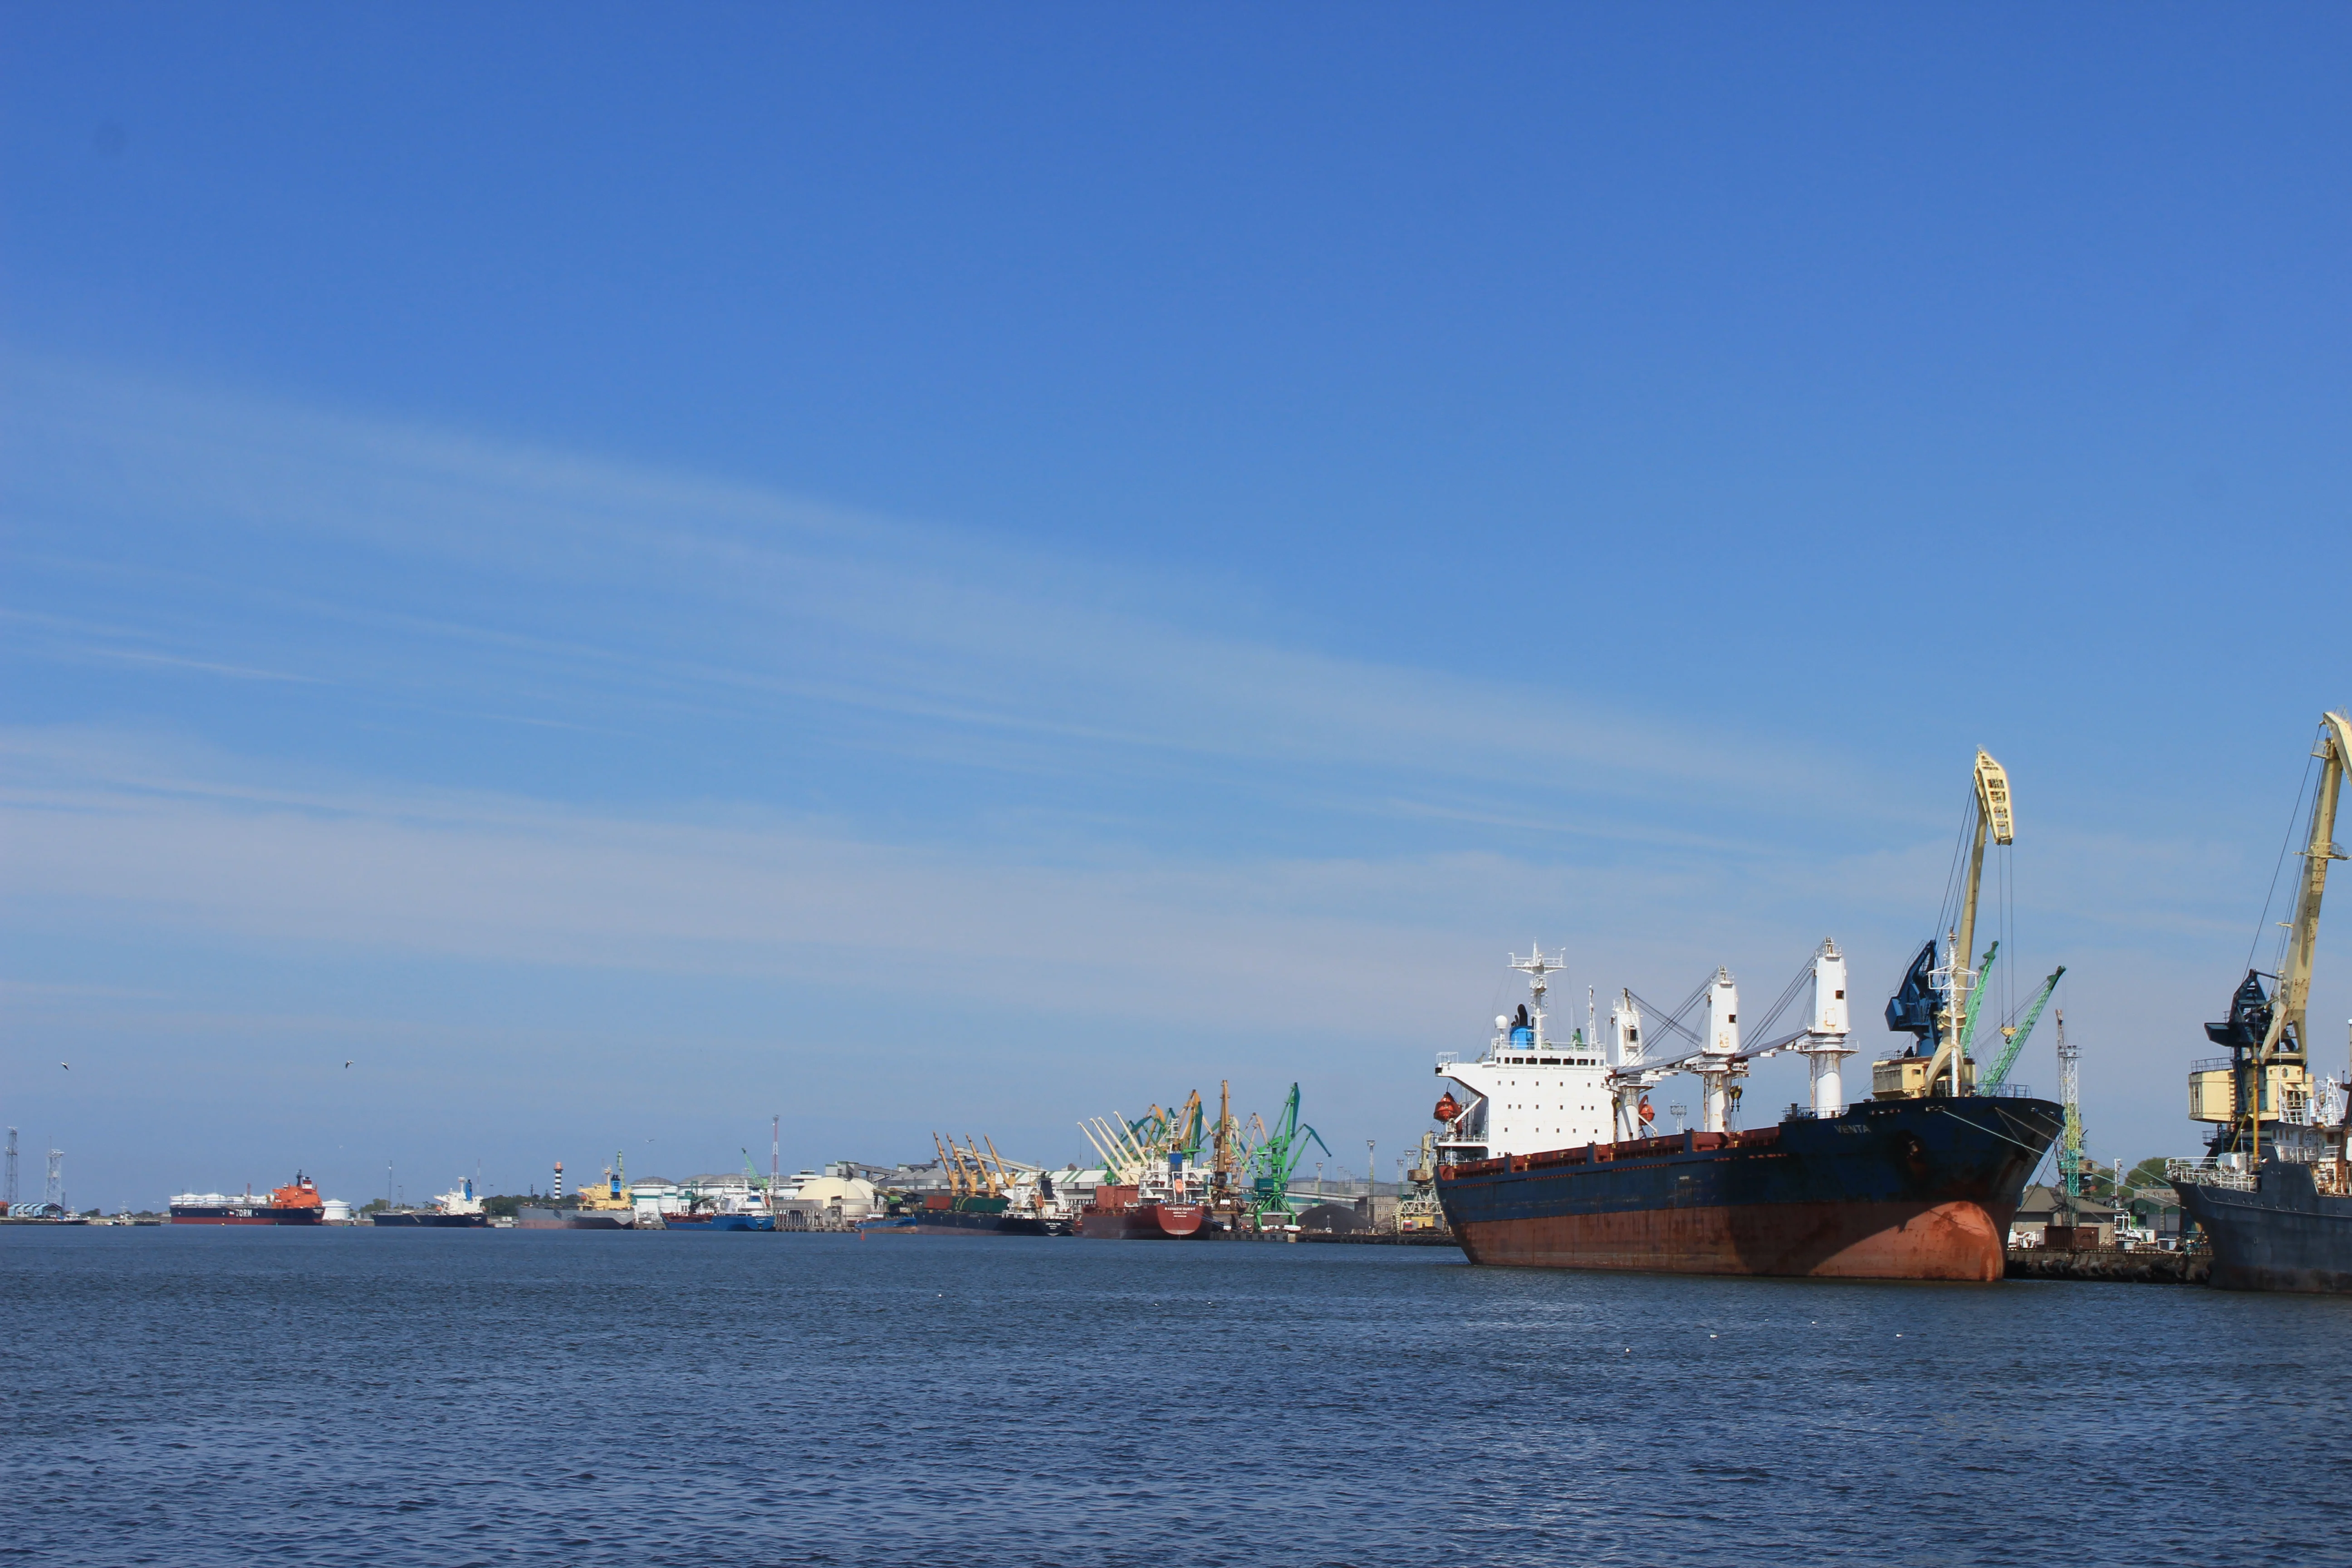 A cargo ship in the harbor of Klaipeda by the Baltic Sea.